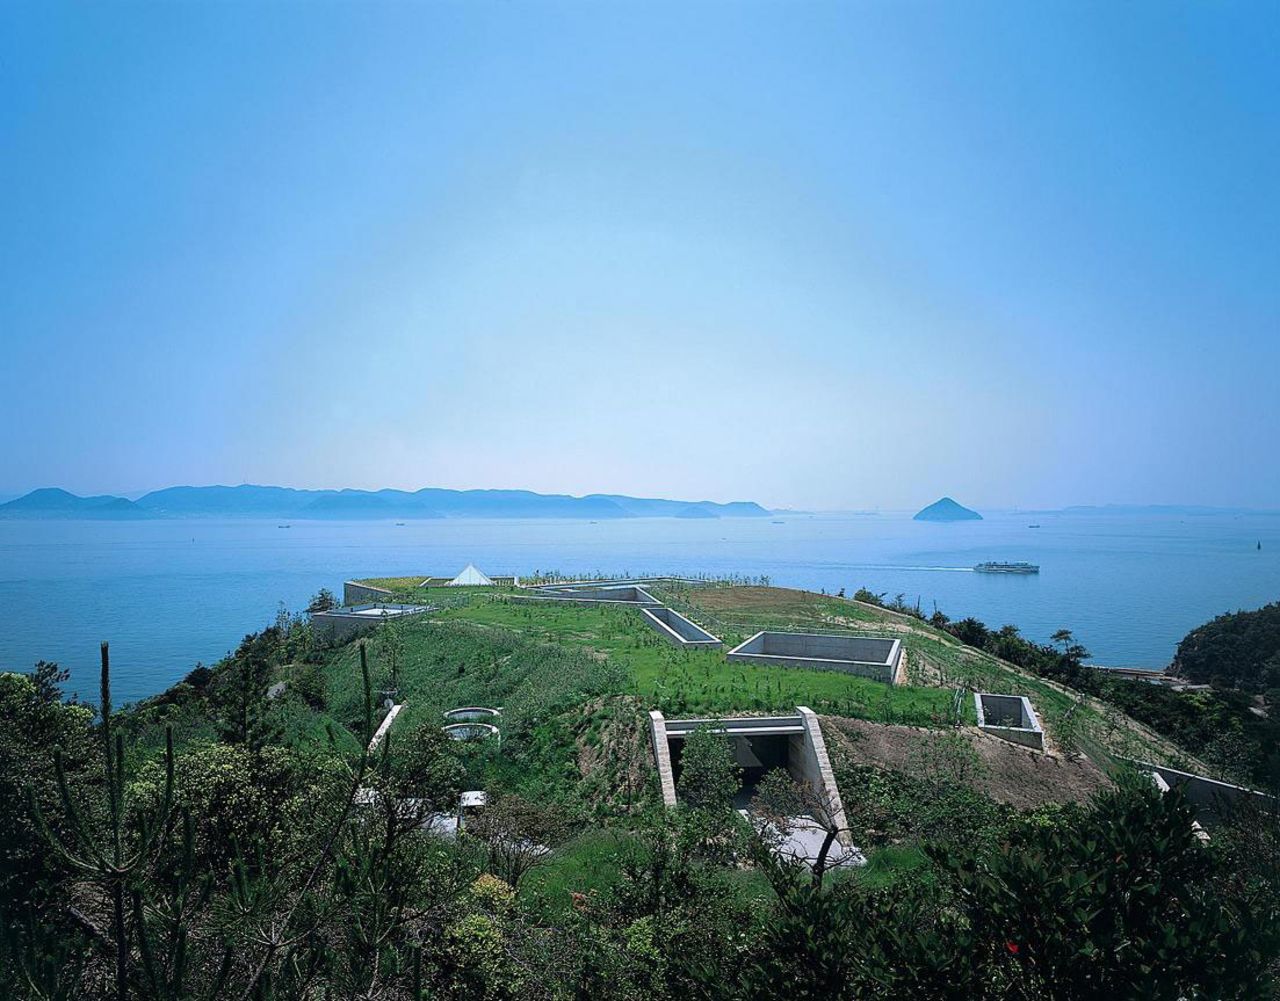 Adhering to his principle of designing buildings that follow the natural forms of landscapes, Tadao Ando's buildings on the island blend into or are built into the earth, some of them opening up to the sky. The Chichu Art Museum (pictured) is a prime example. 